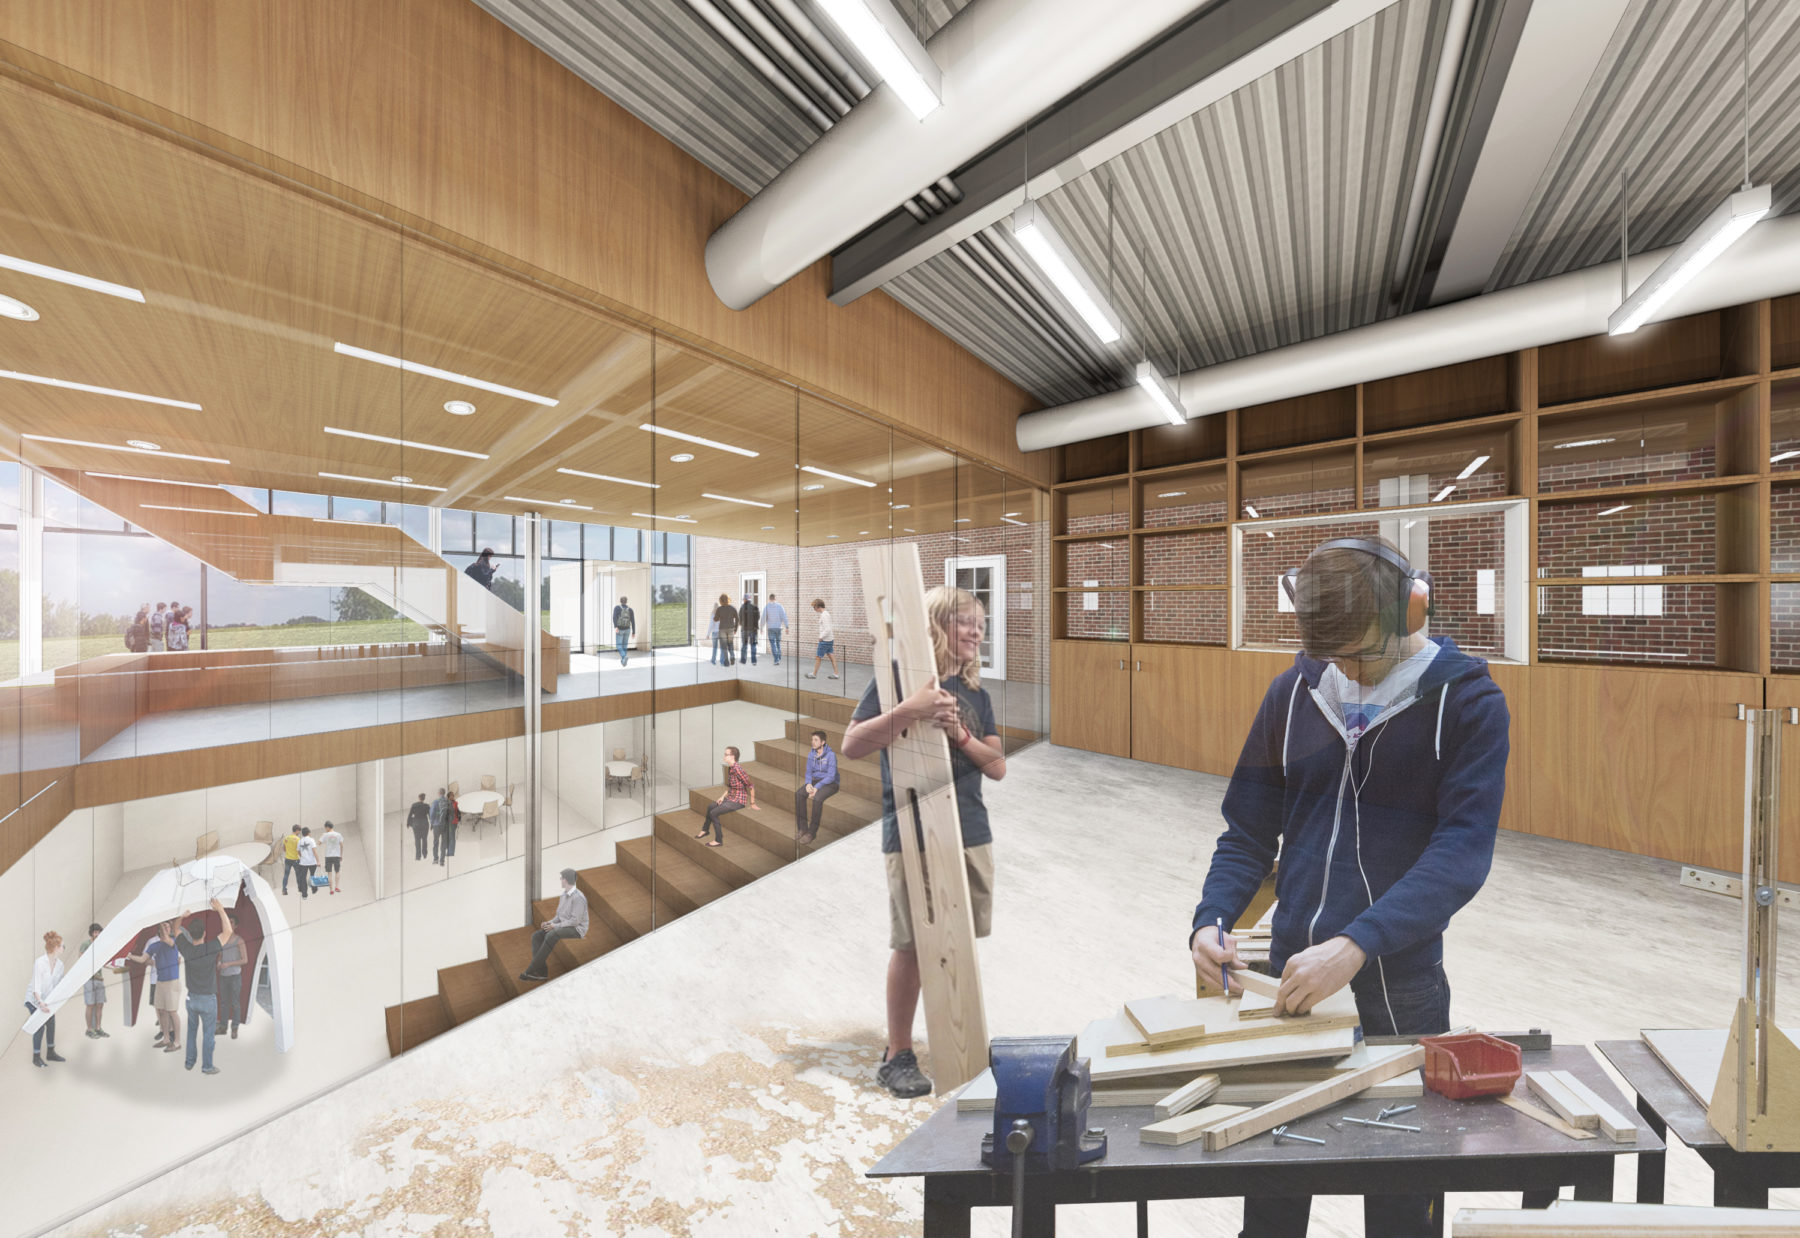 Rendering of building interior with two students woodworking